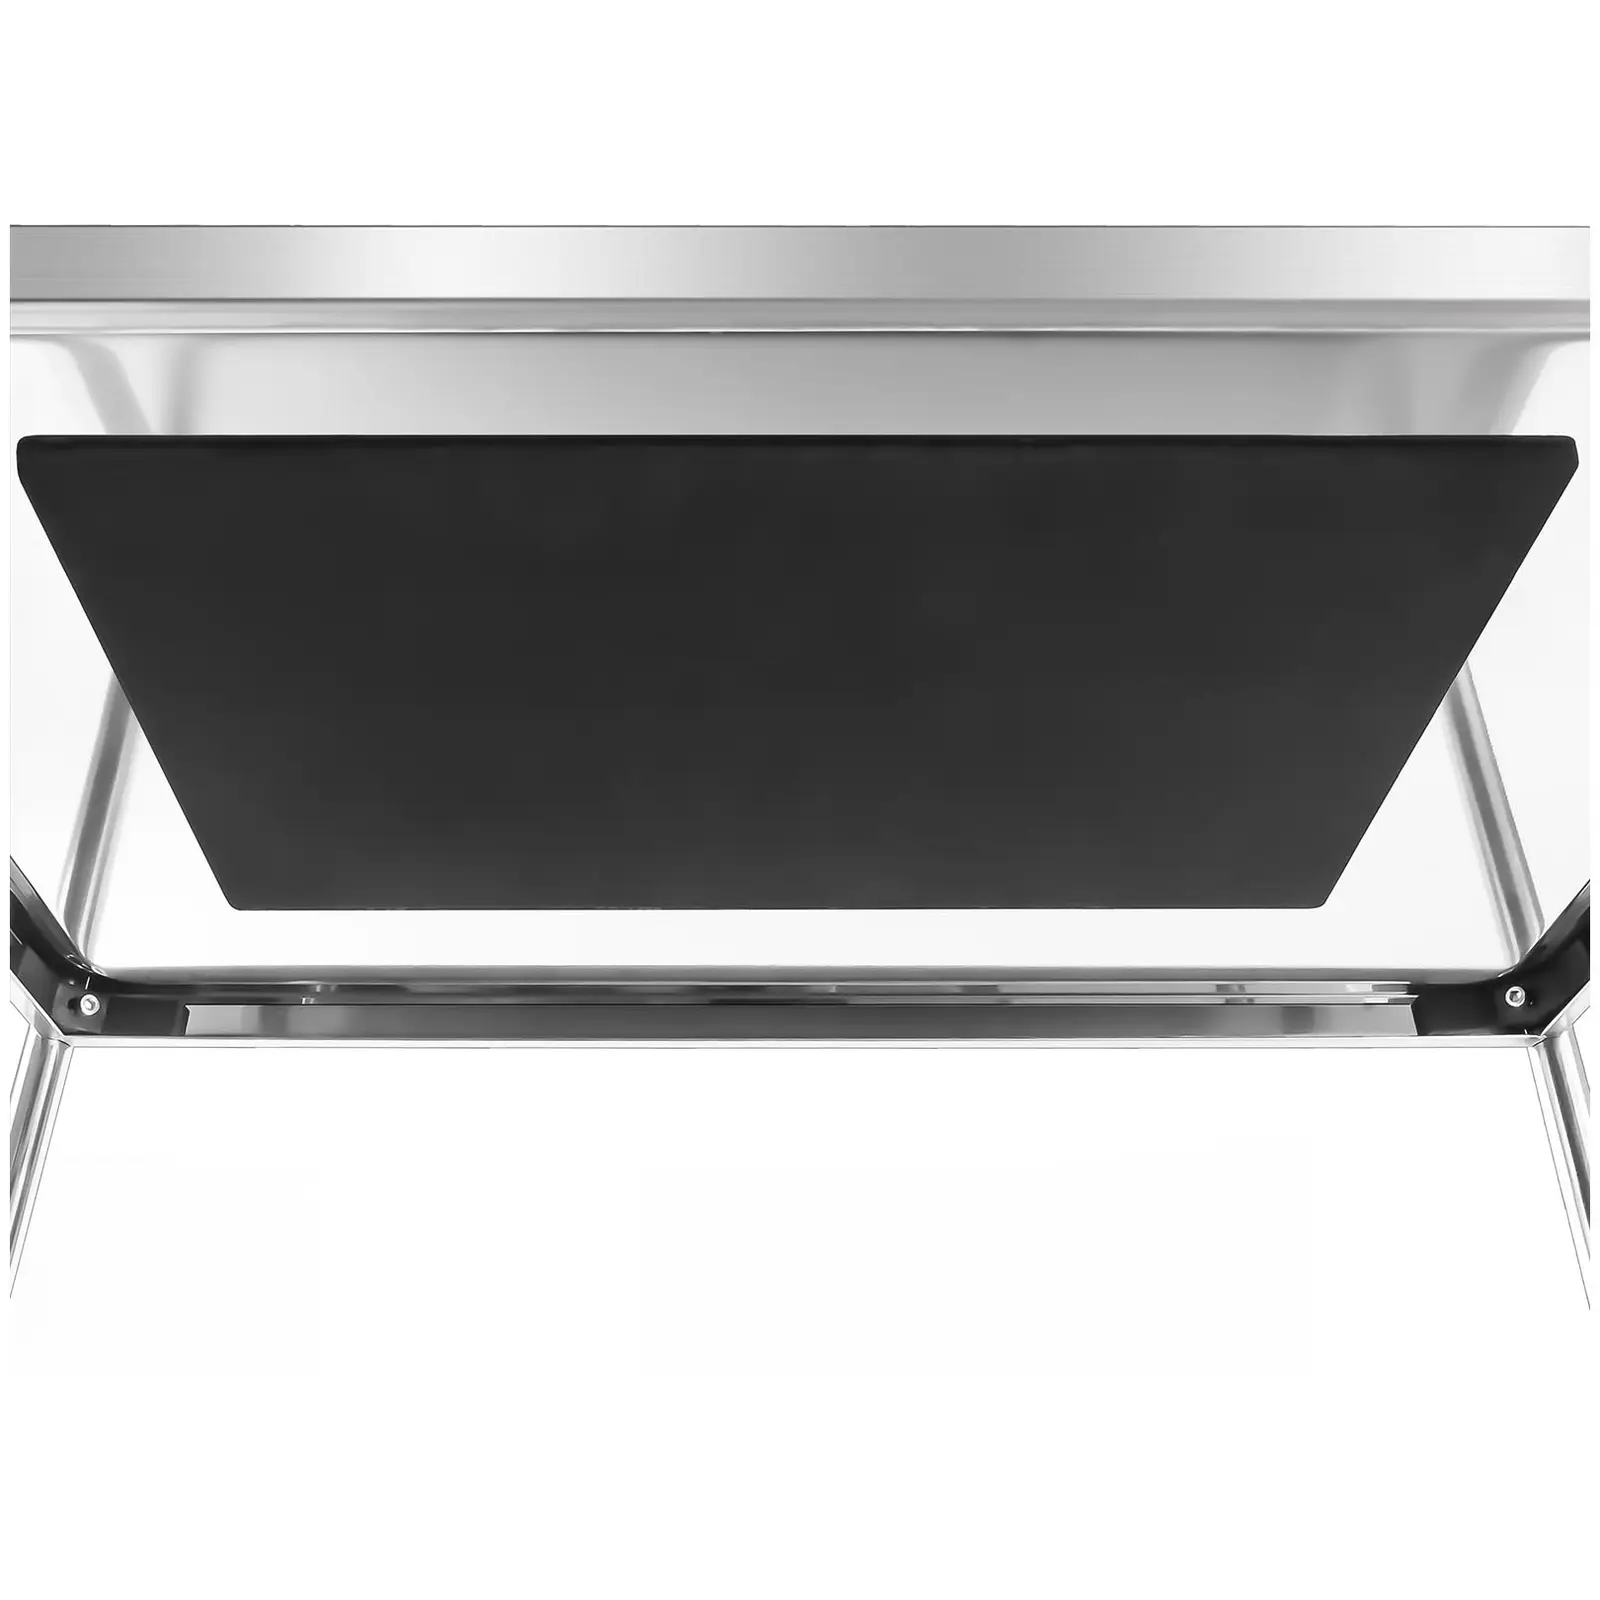 Stainless Steel Serving Trolley - 3 Shelves - Up To 500 kg